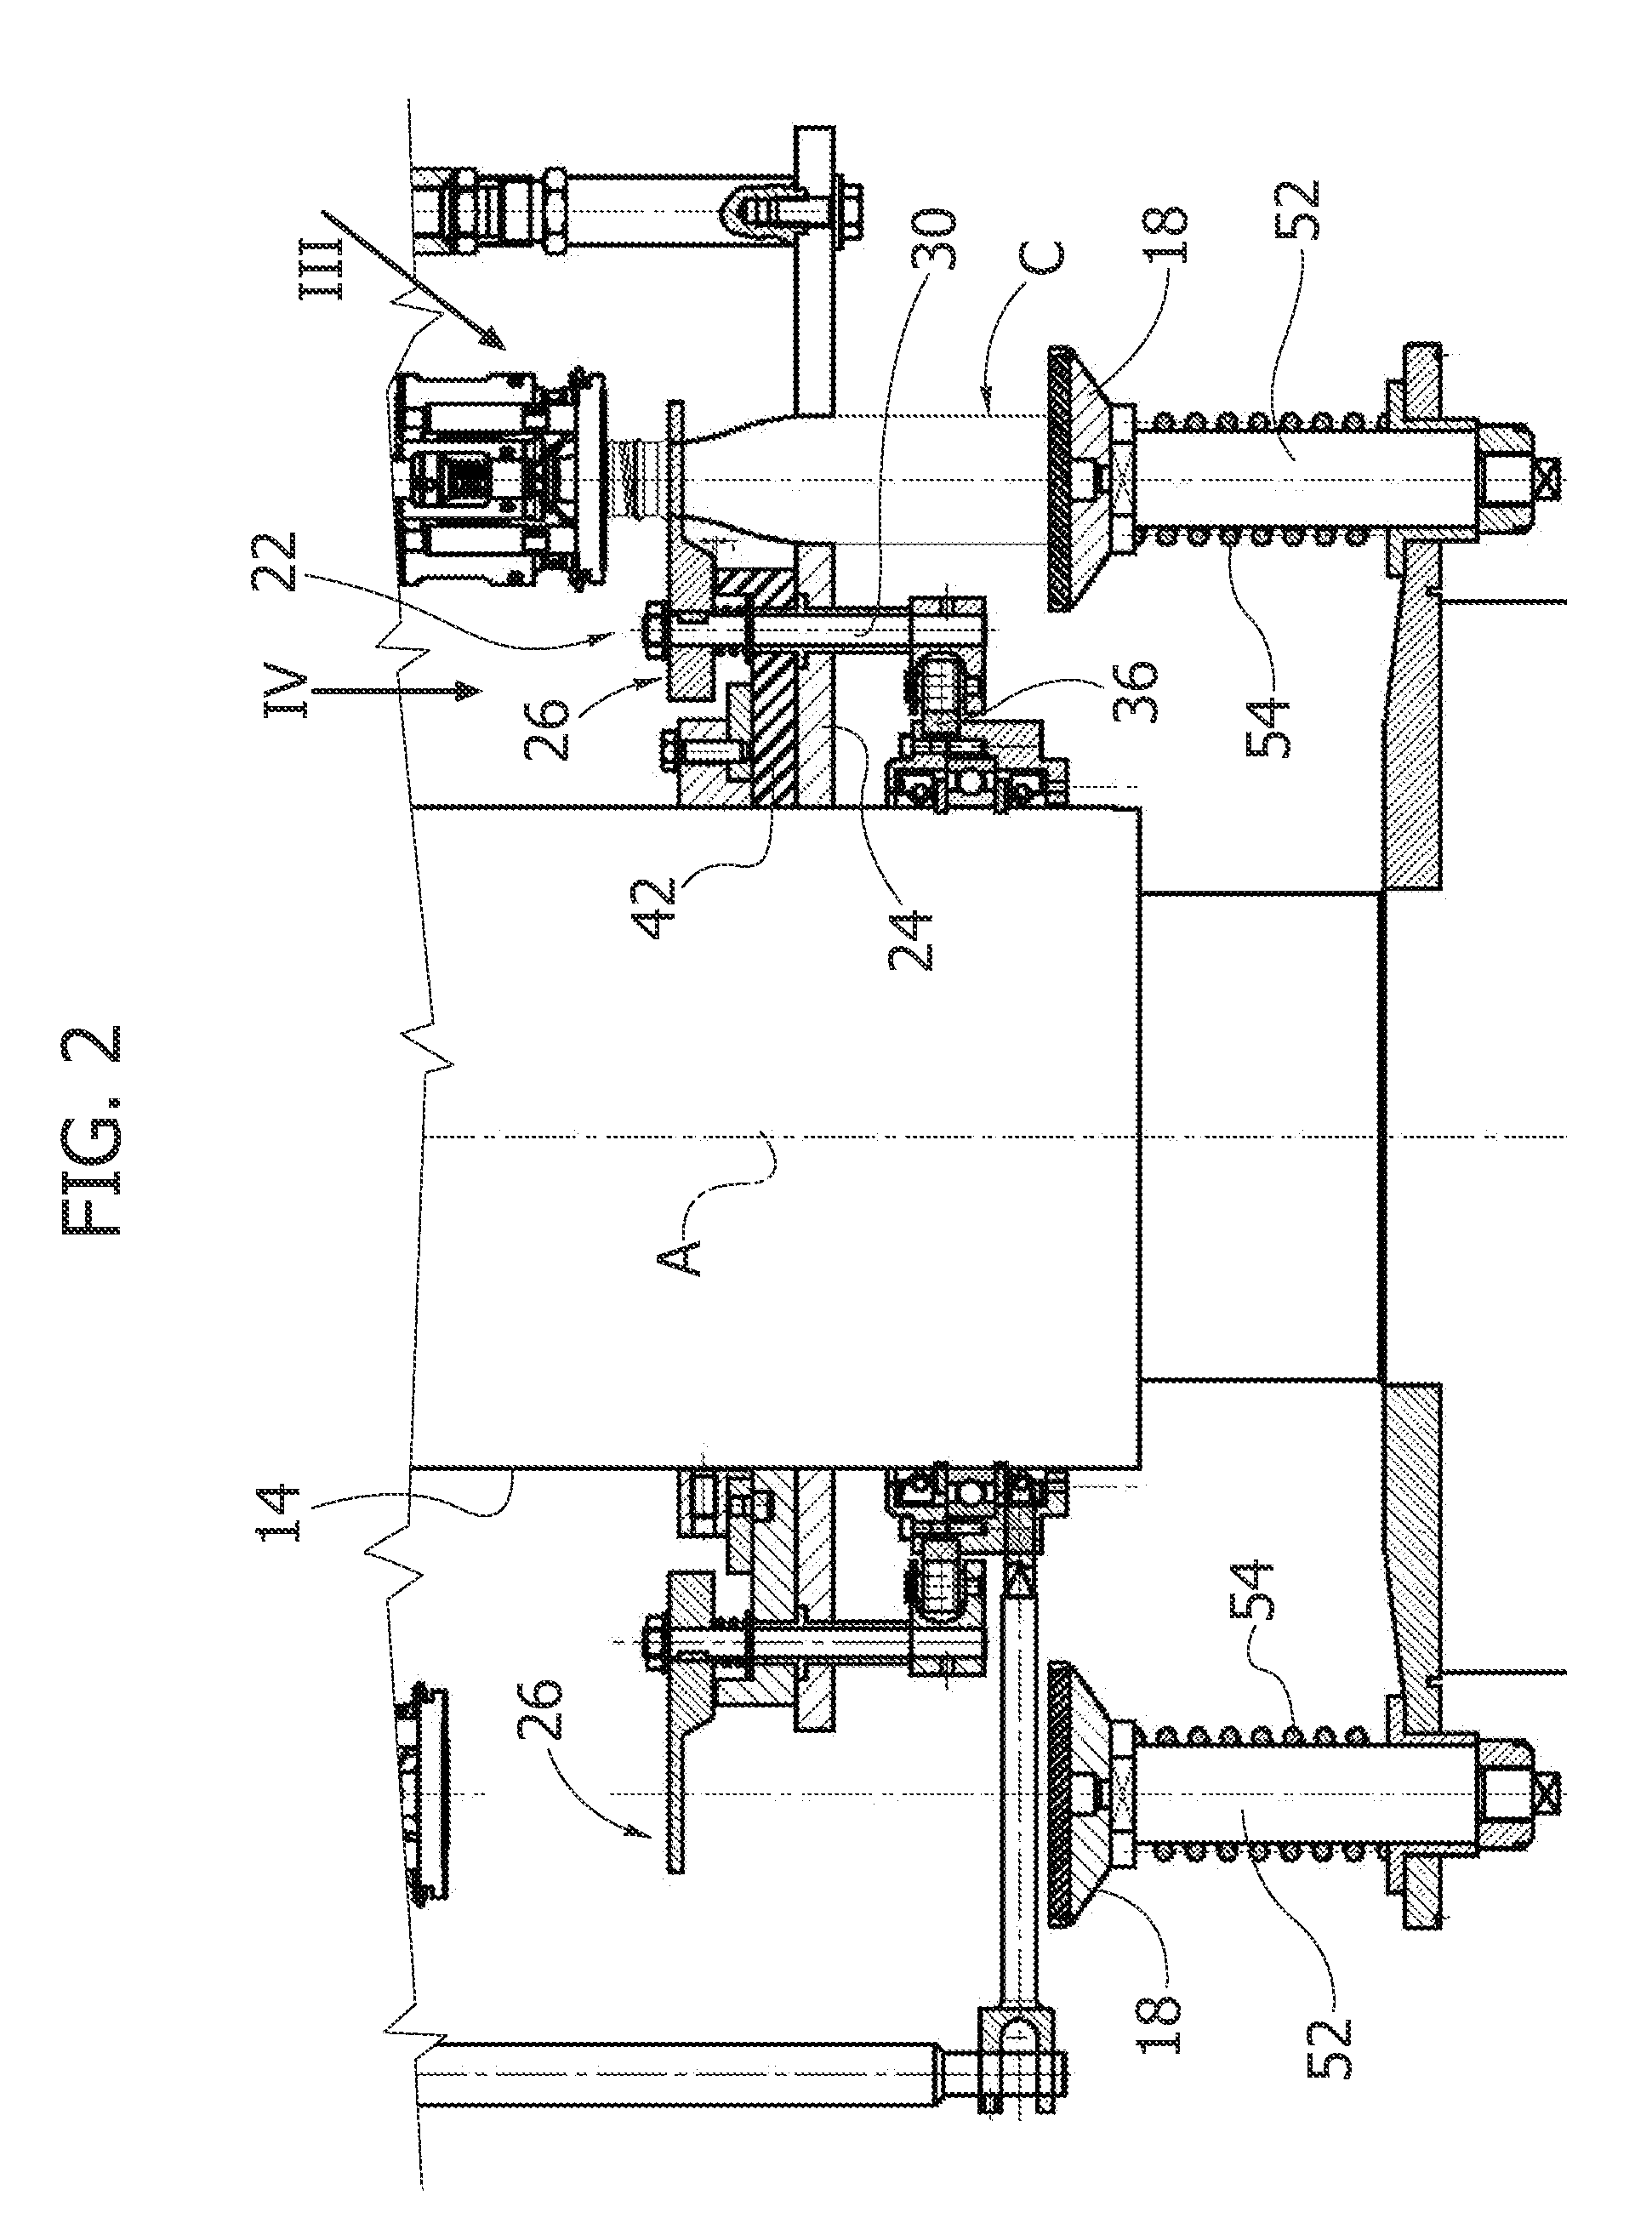 Machine for application of caps on containers such as bottles and the like